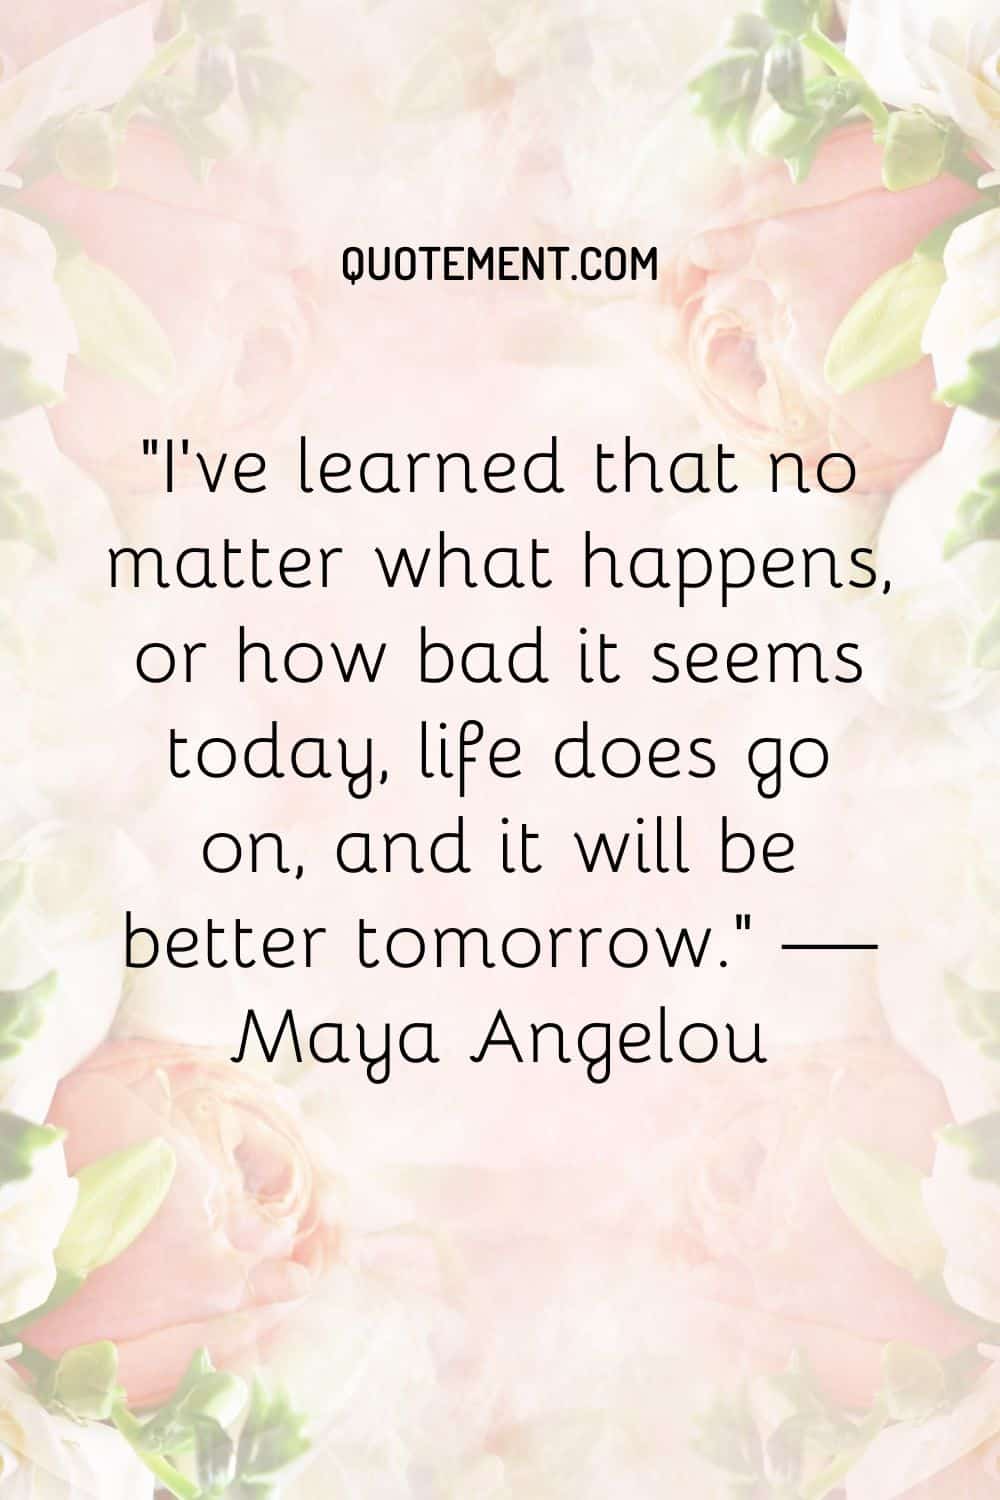 I’ve learned that no matter what happens, or how bad it seems today, life does go on, and it will be better tomorrow